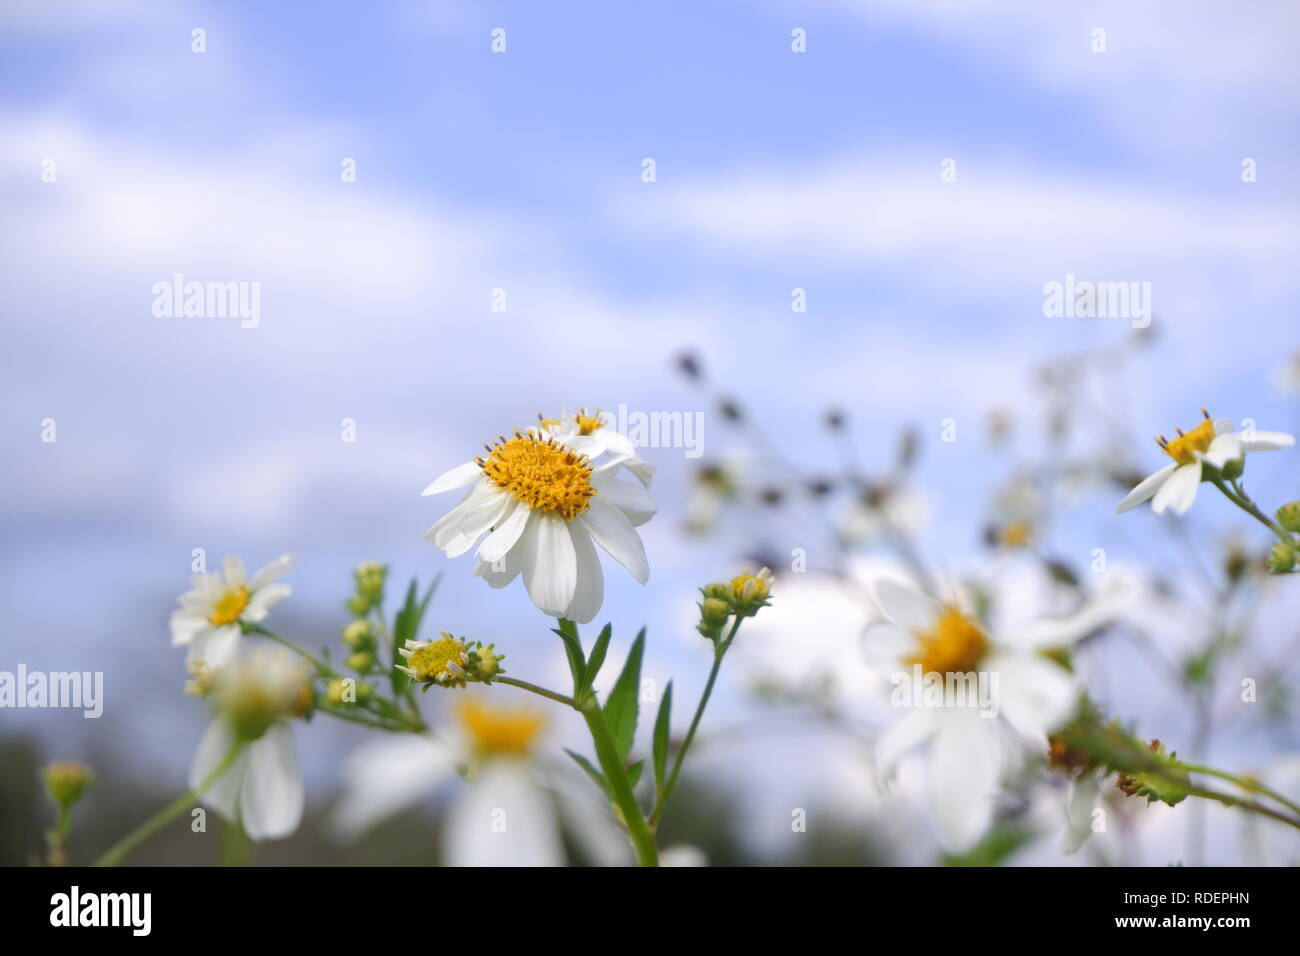 daisy white flower bloom in nature against blue sky background Stock Photo